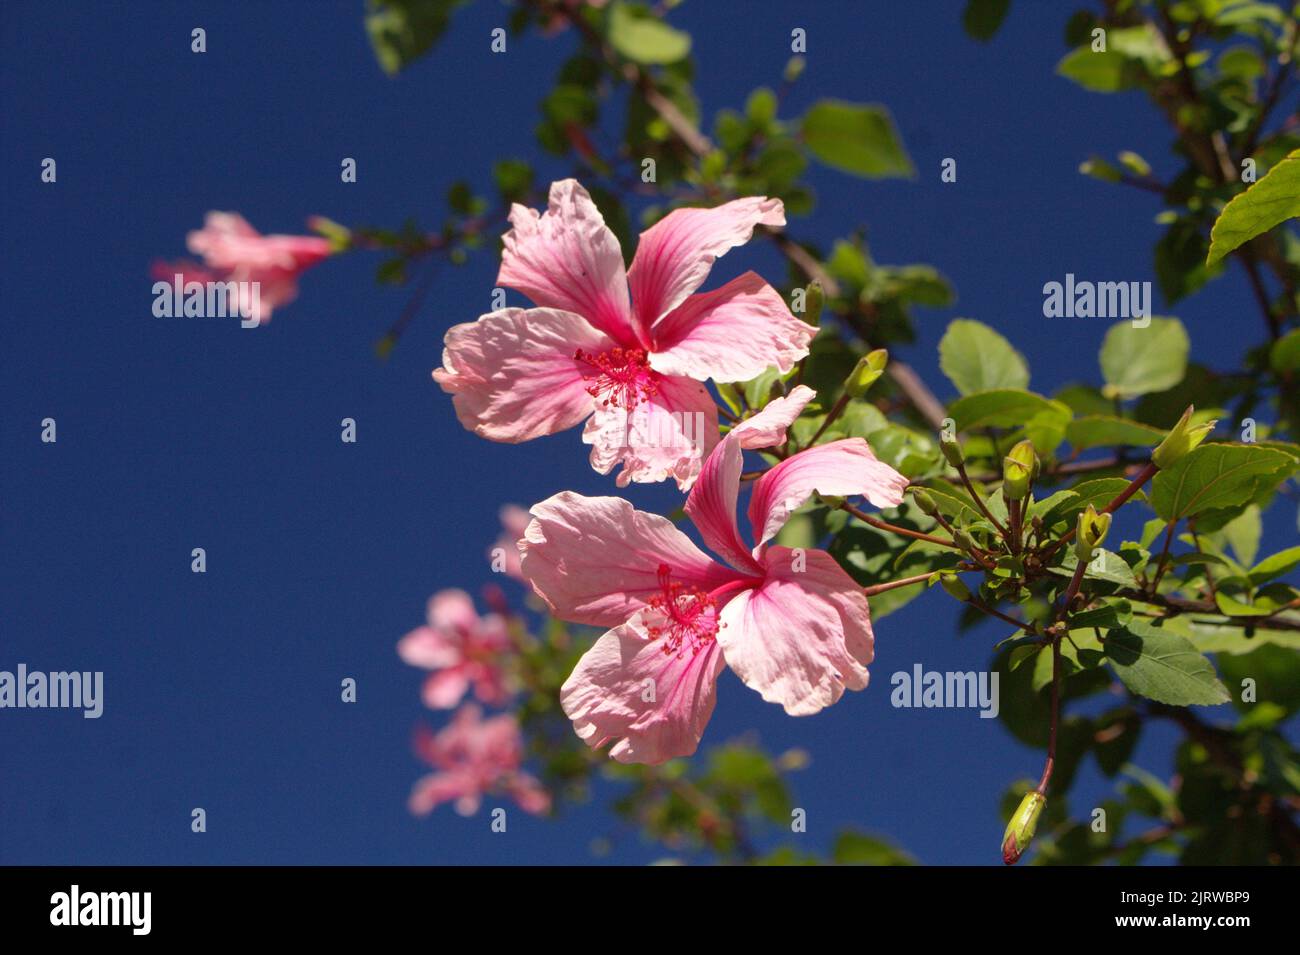 Big pink Hibiscus flowers against blue sky Stock Photo